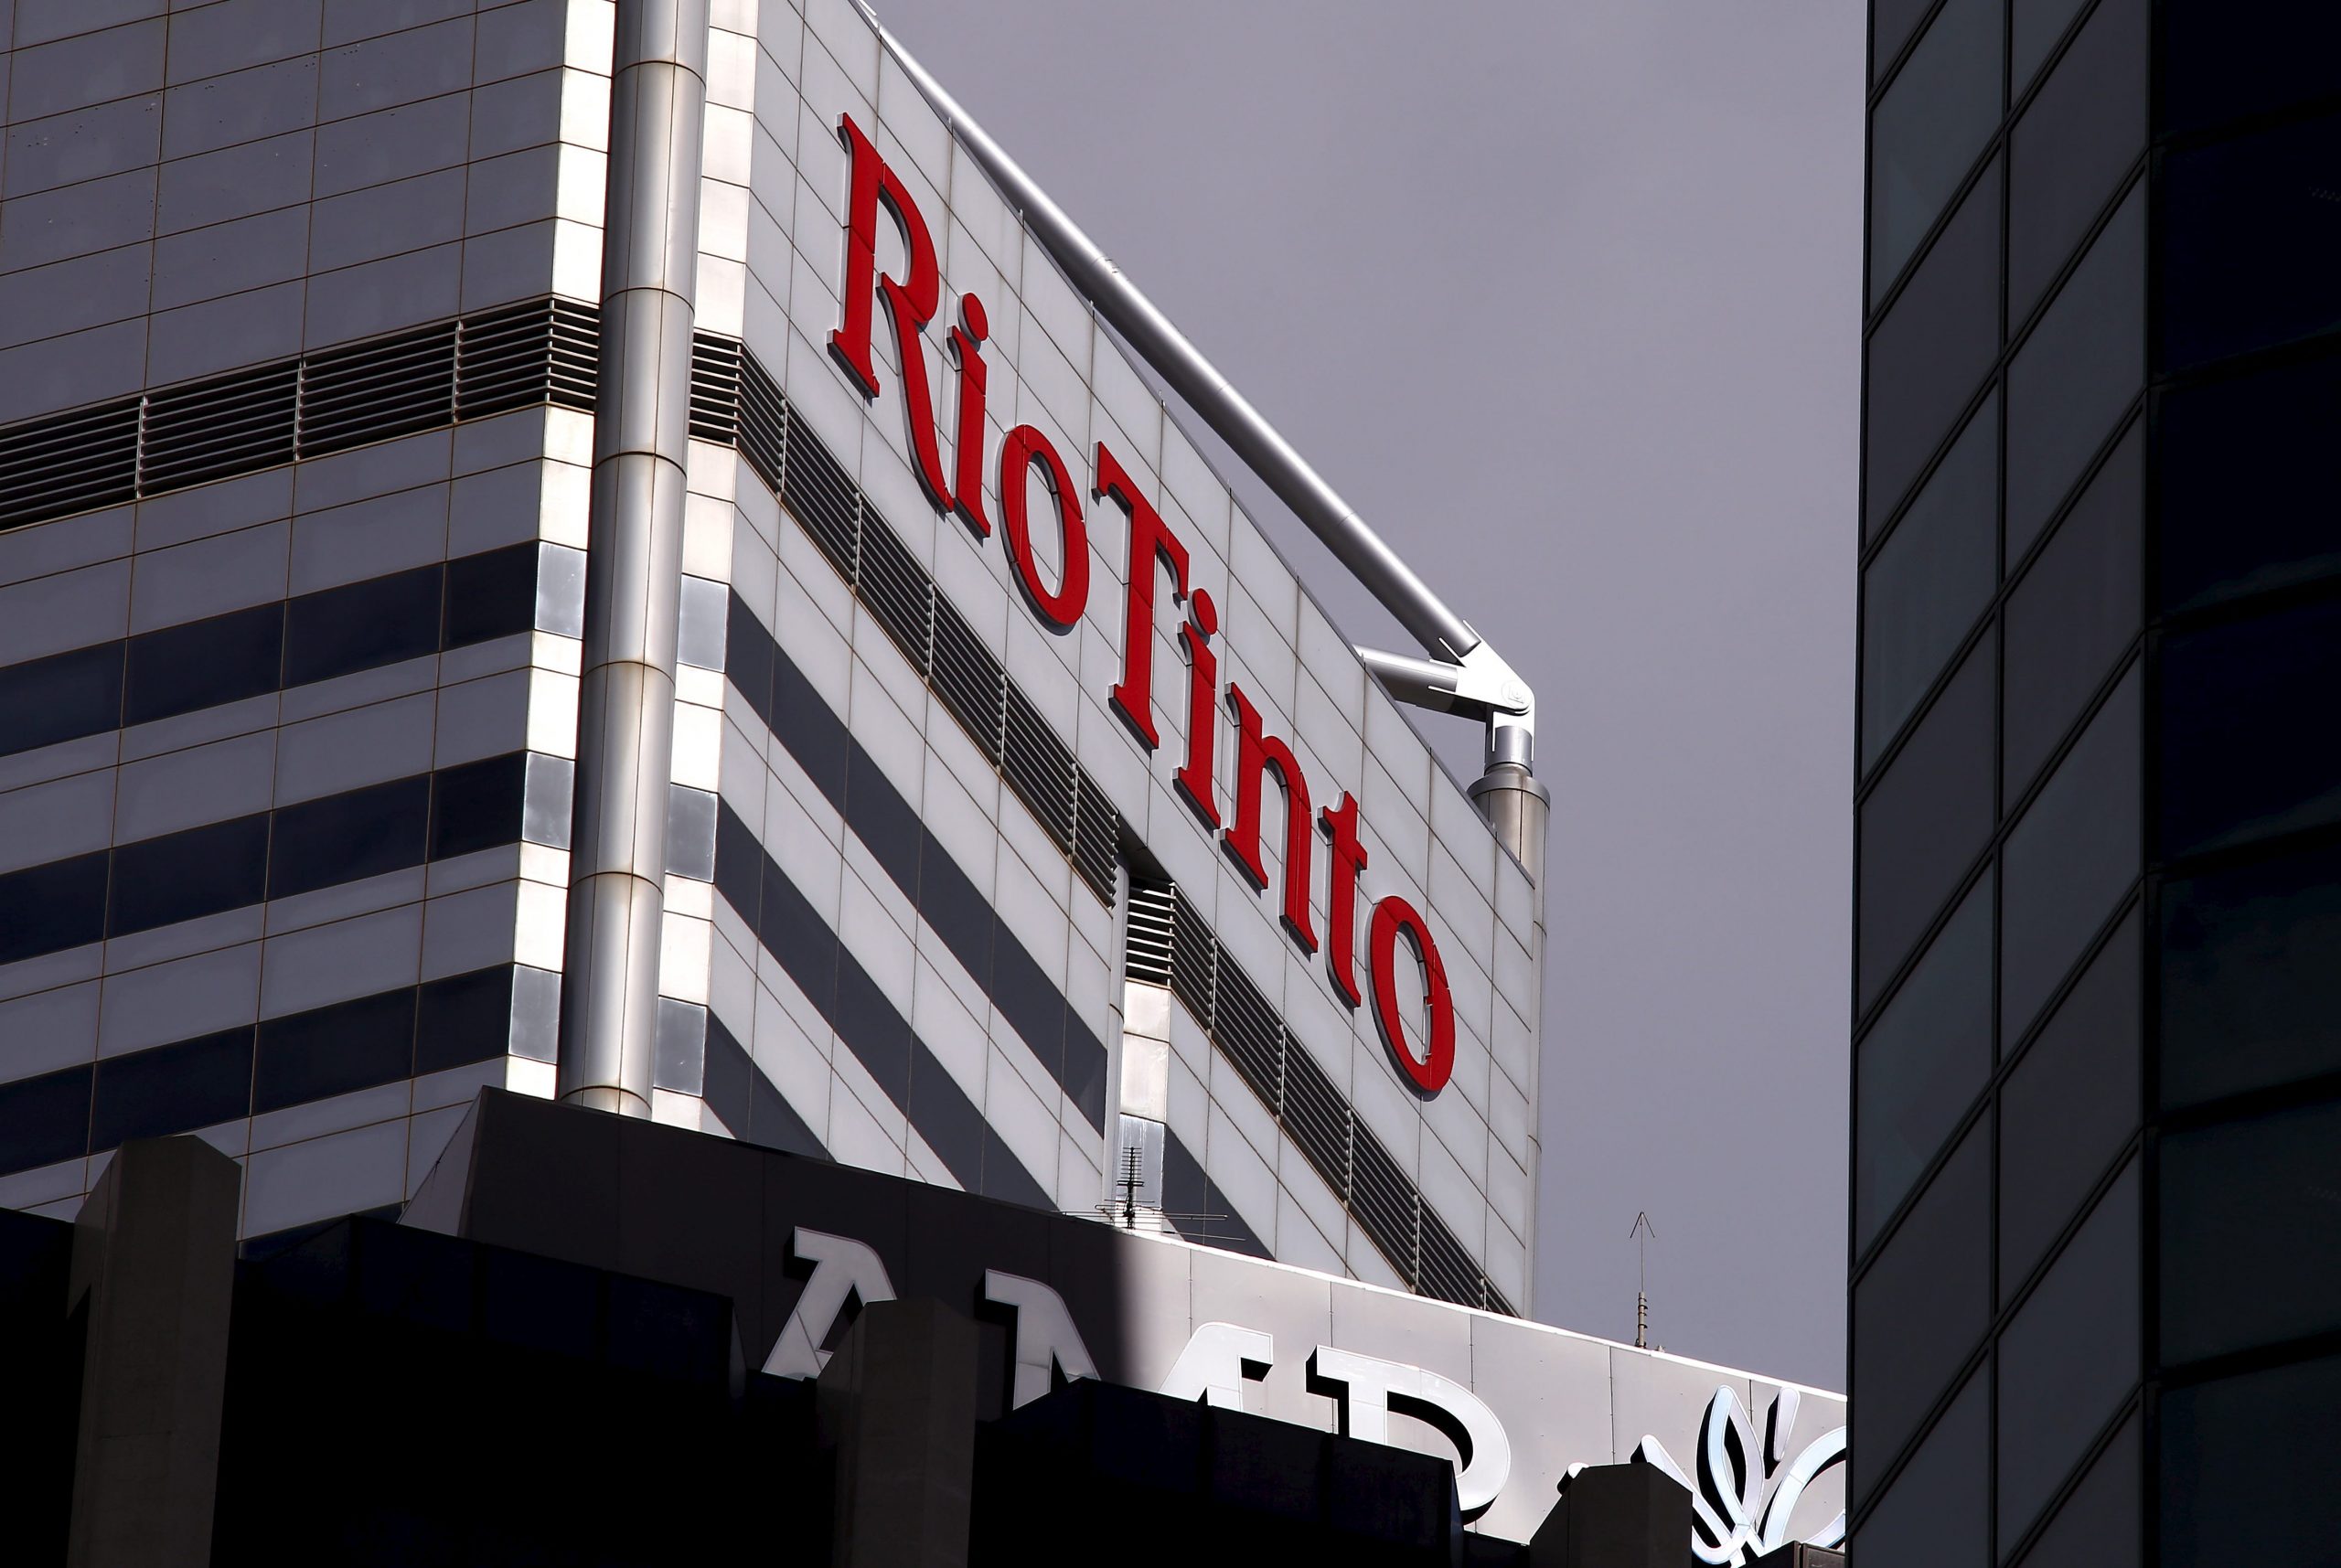 FILE PHOTO: A sign adorns the building where mining company Rio Tinto has their office in Perth, Western Australia, November 19, 2015.   REUTERS/David Gray